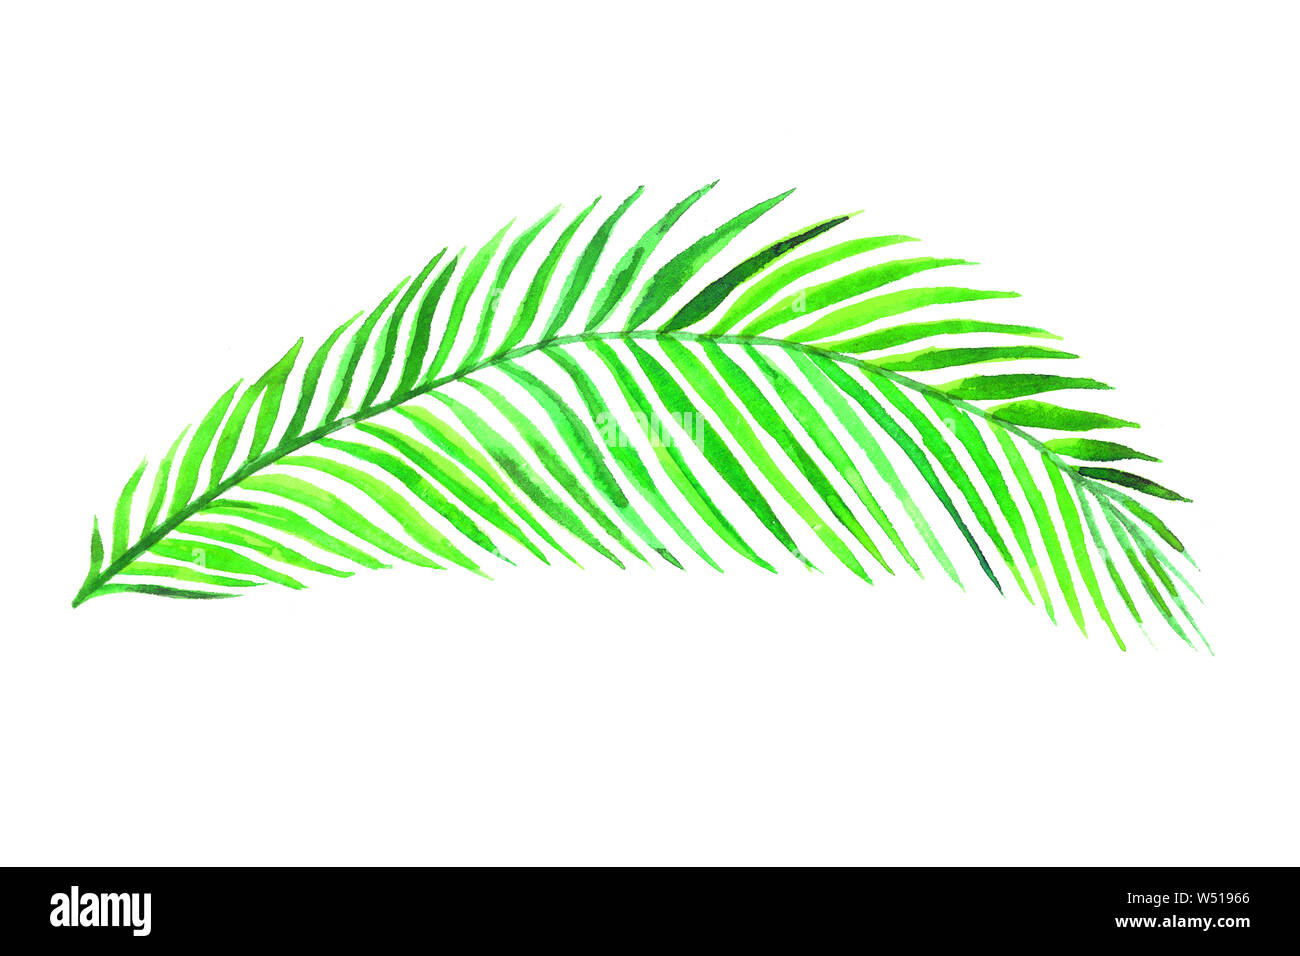 Areca Palm leaf isolated on white hand painted watercolor illustration, design element for card, invitation, pattern Stock Photo